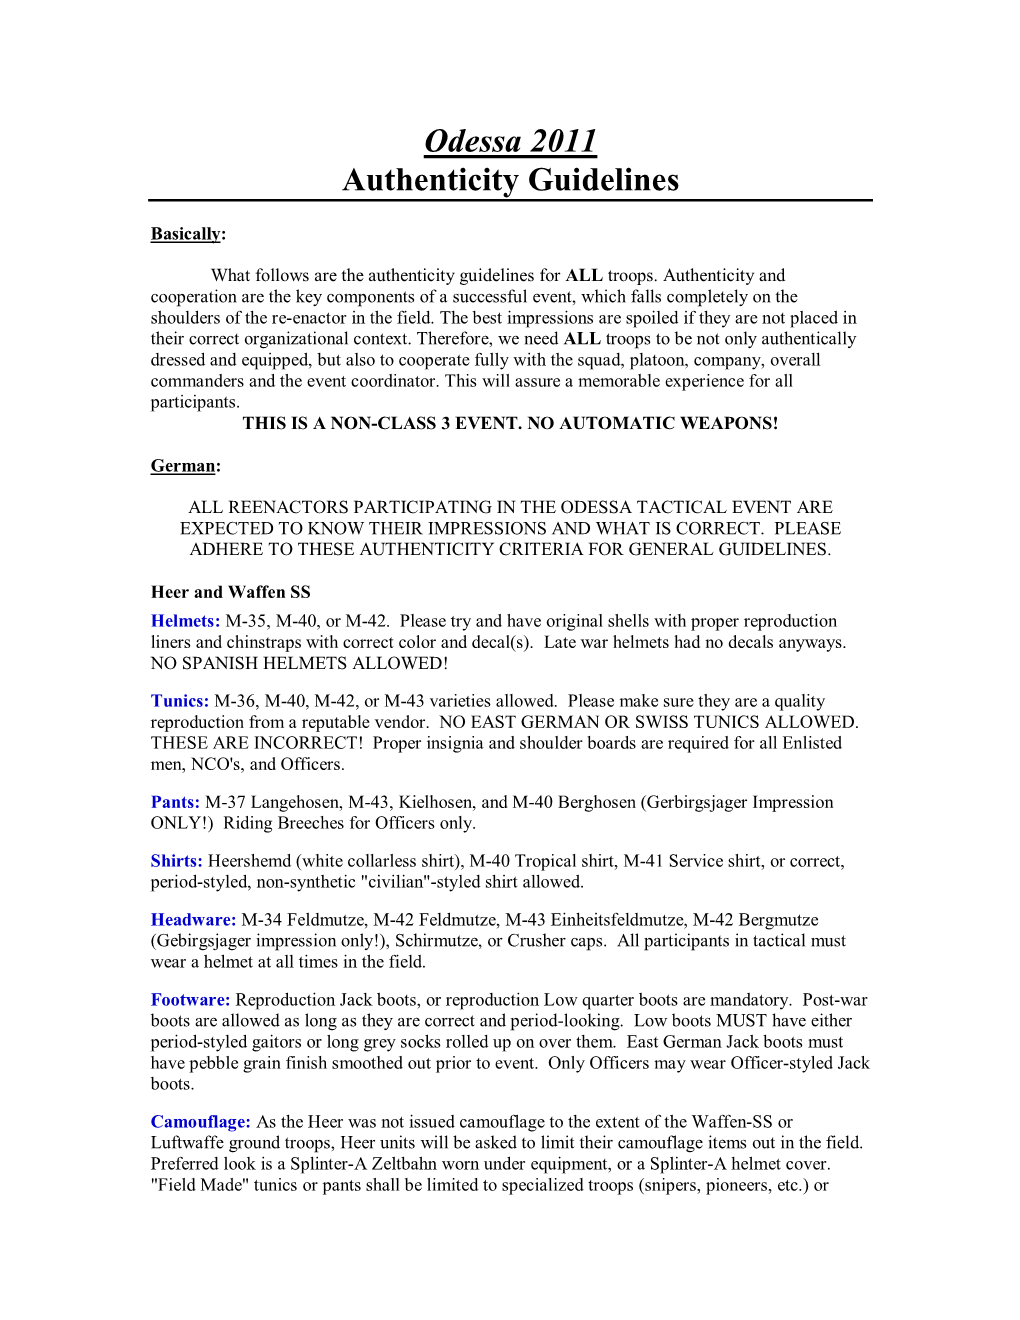 Odessa Authenticity Guidelines 2011